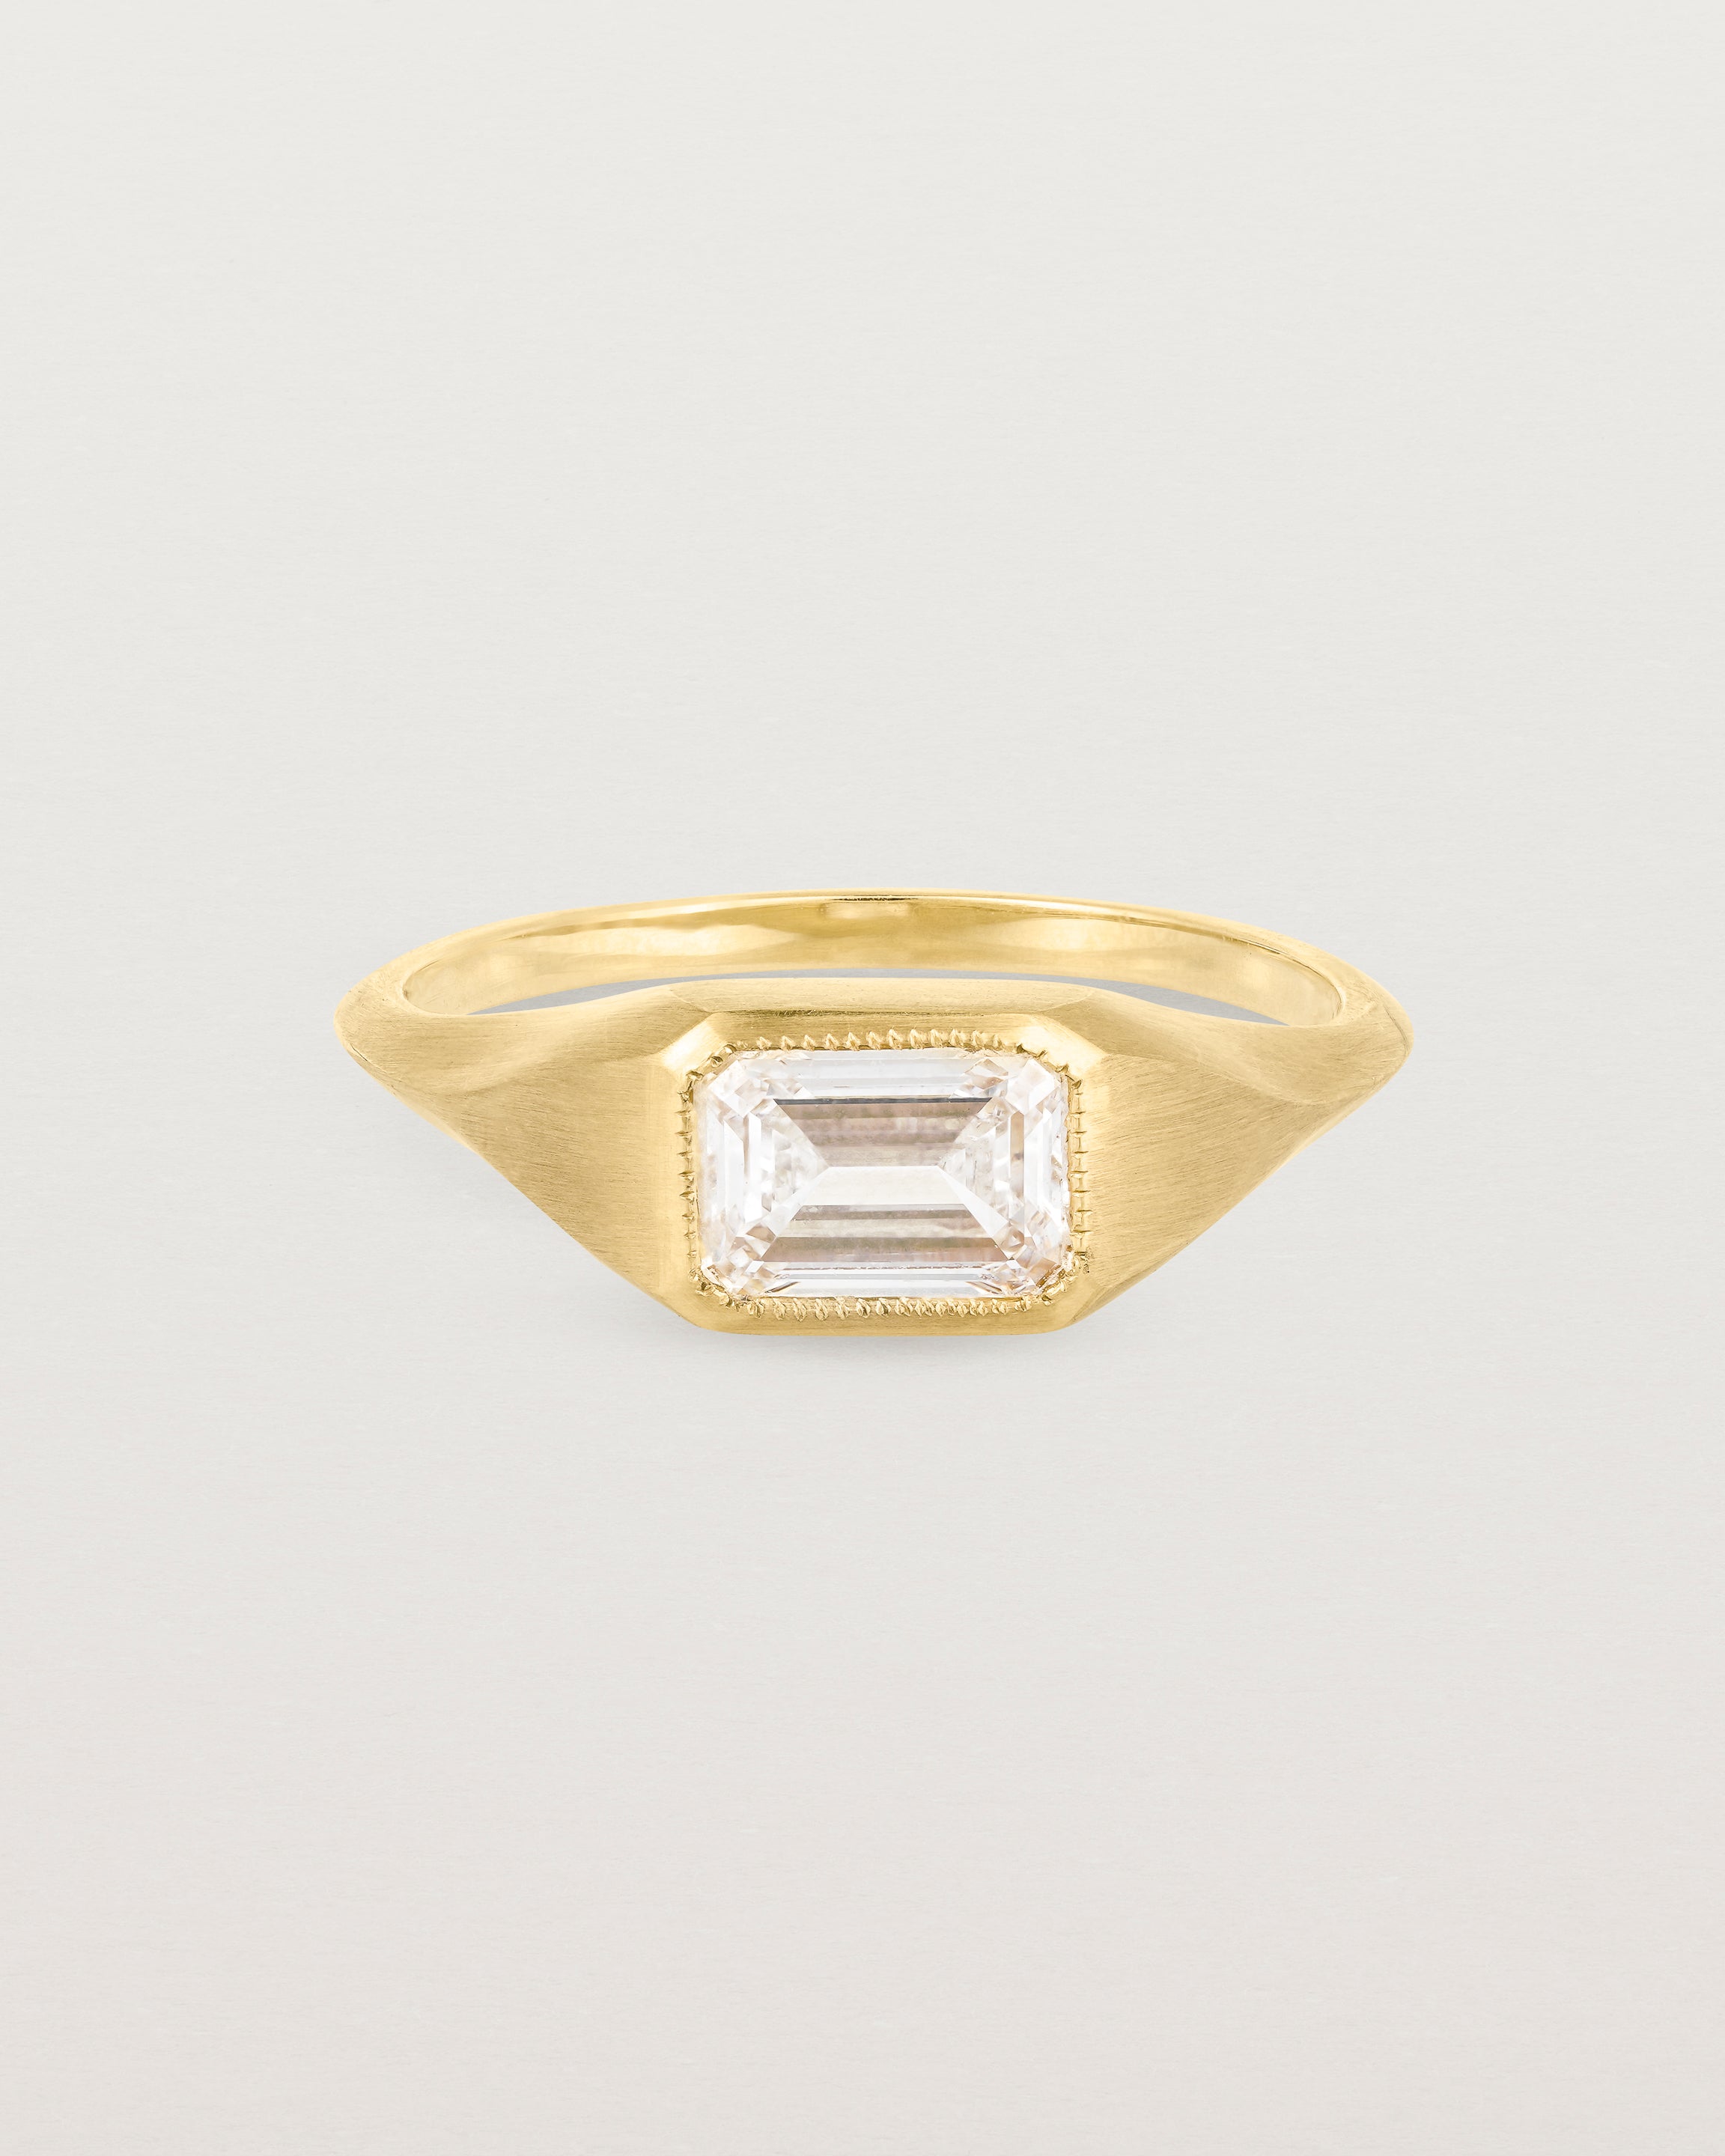 A yellow gold Signet Ring featuring a emerald cut white diamond. _label: Matte Finished Example